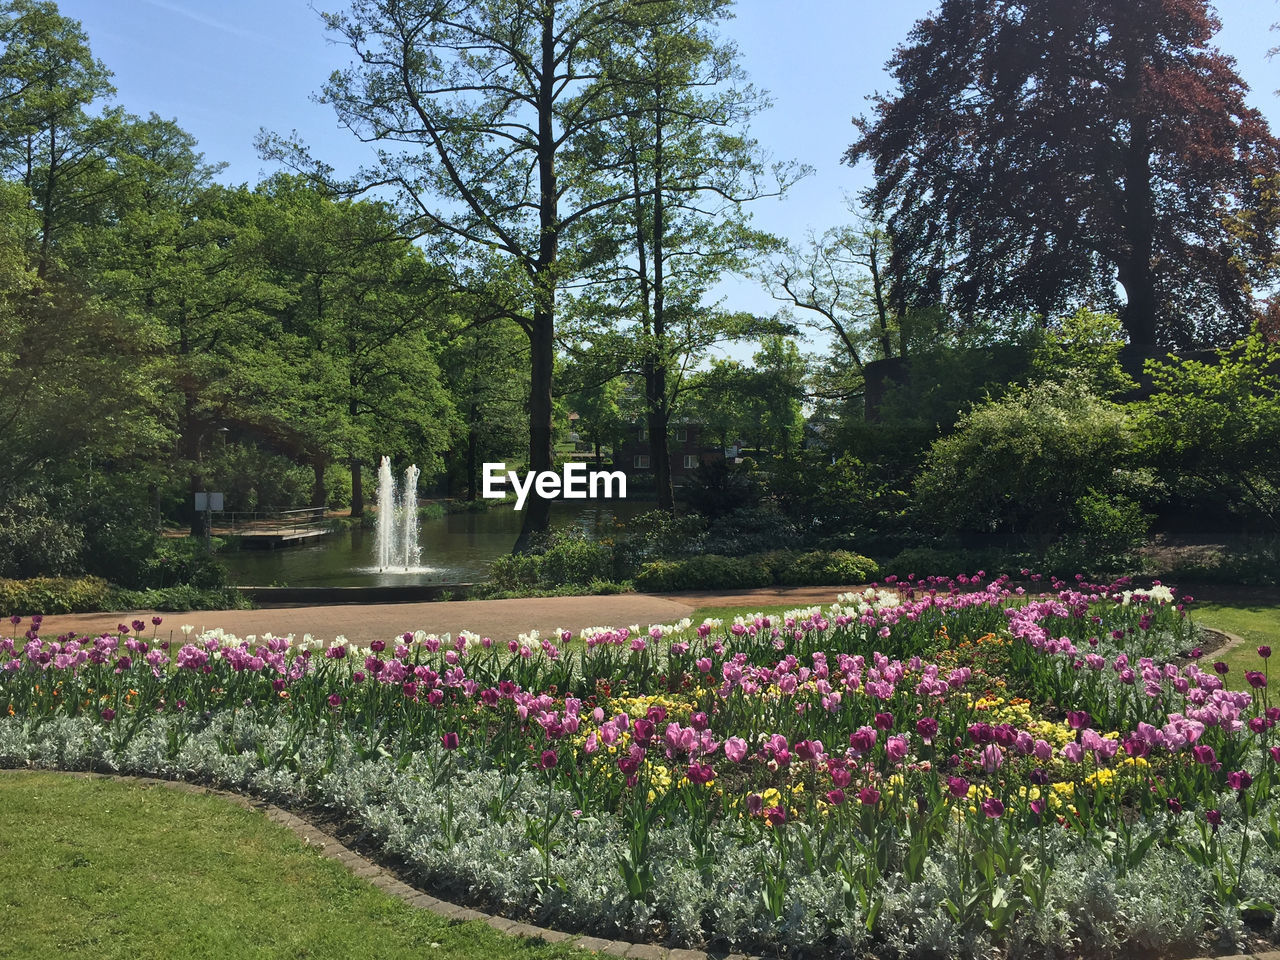 VIEW OF FLOWERING PLANTS BY PARK